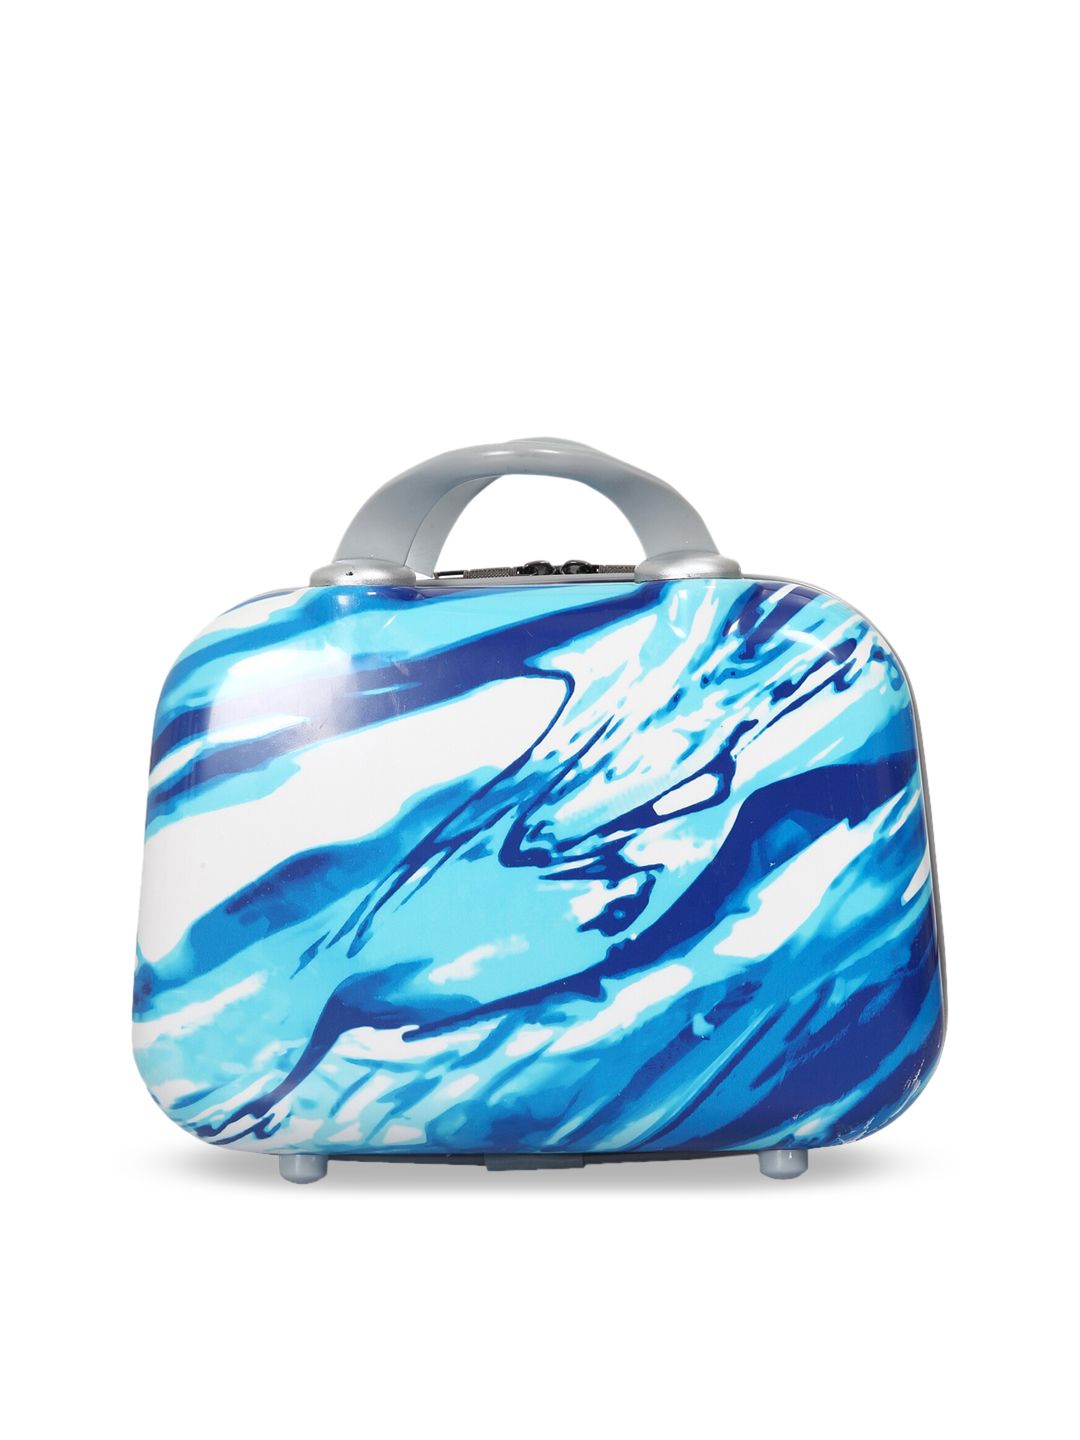 Polo Class Blue & White Printed Hard-Sided Vanity Bag Price in India